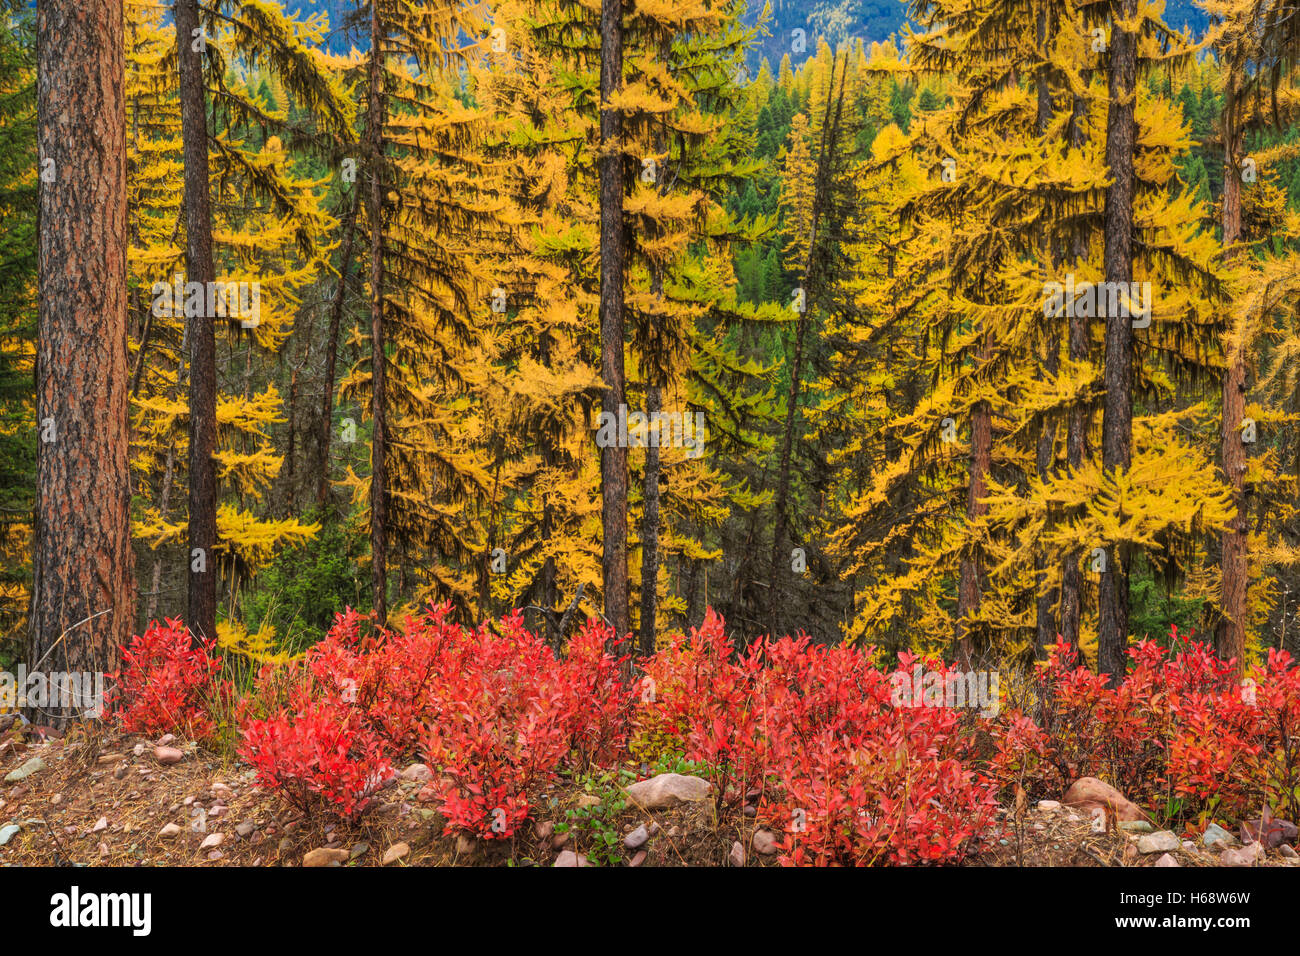 autumn colors of larch and underbrush in lolo national forest of the swan range near seeley lake, montana Stock Photo